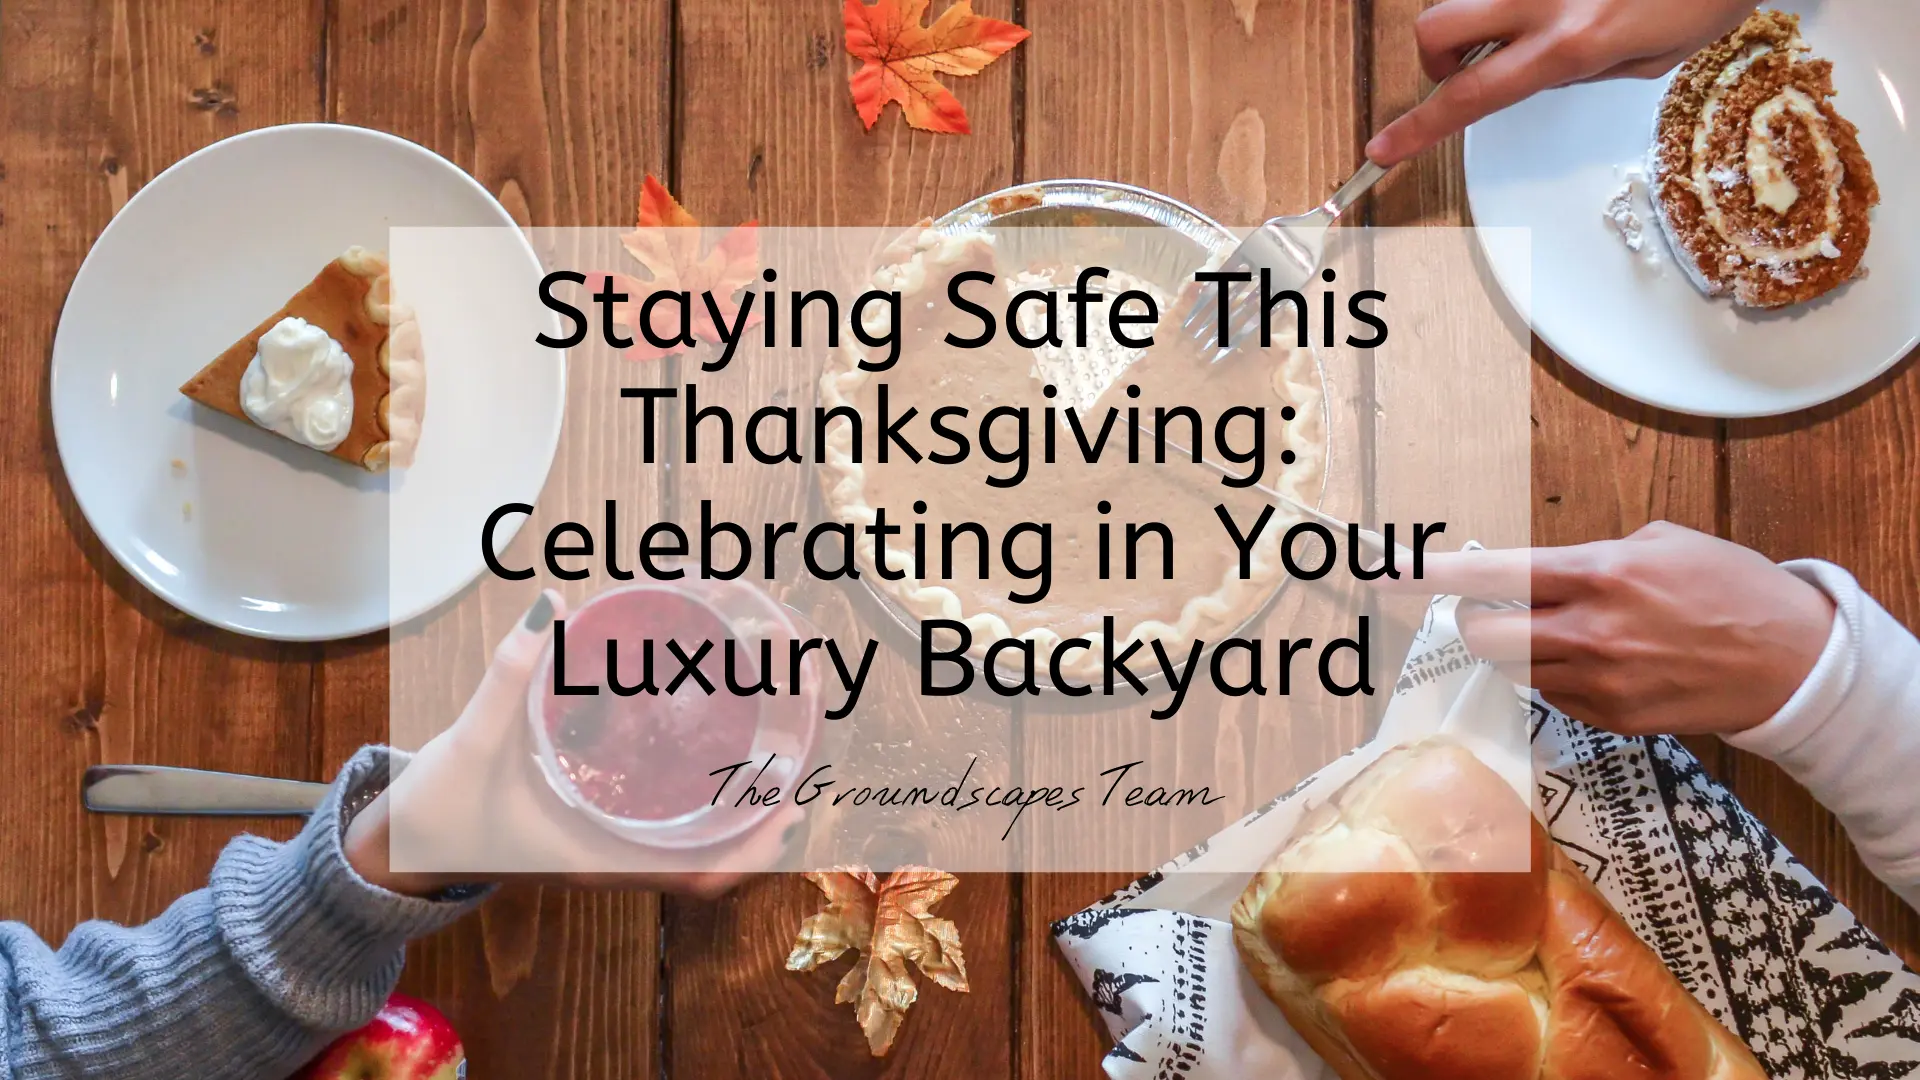 Staying Safe This Thanksgiving: Celebrating in Your Luxury Backyard